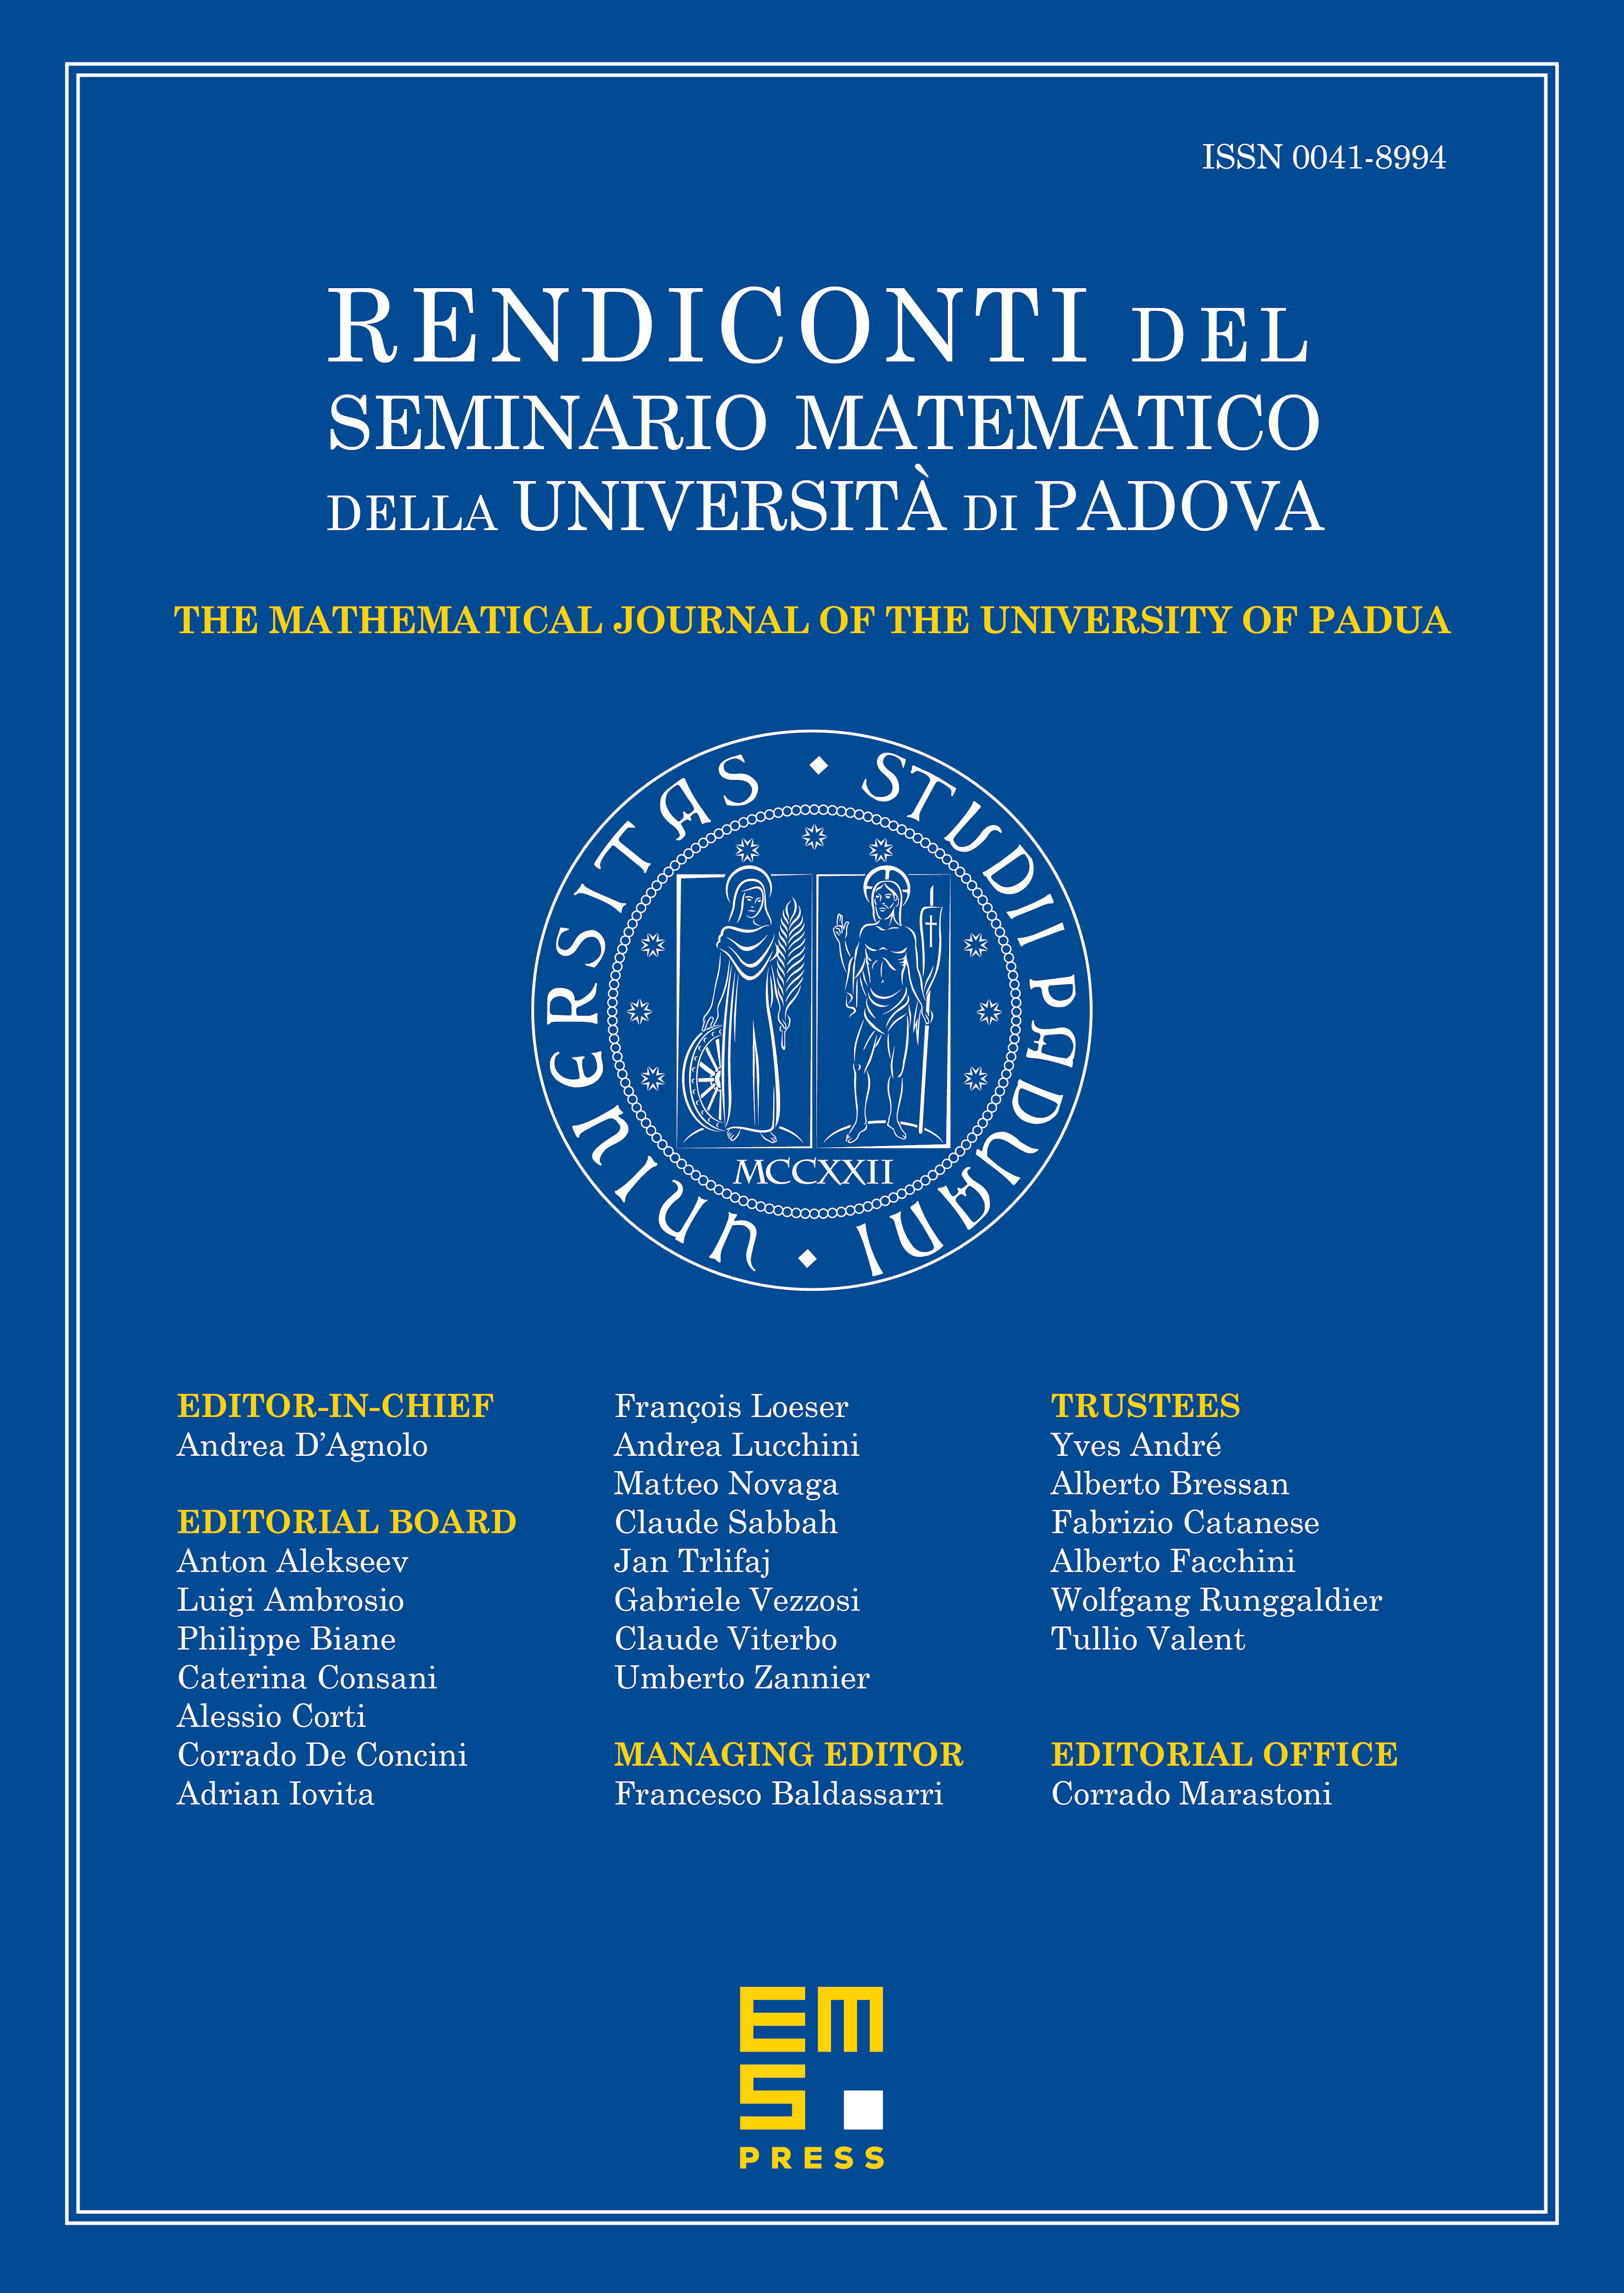 Convolution identities of poly-Cauchy numbers with level 2 cover